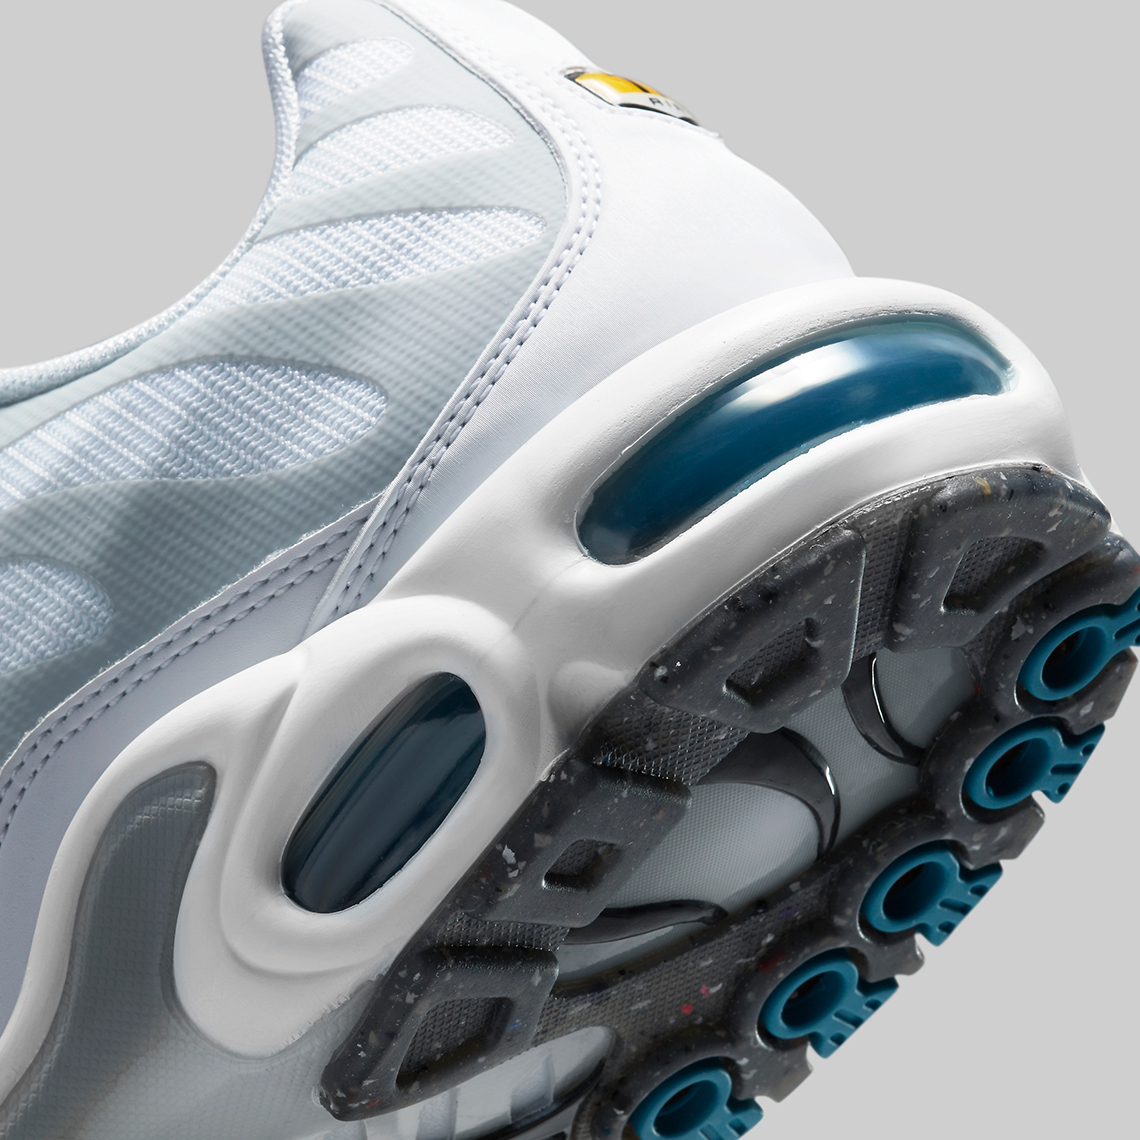 Recycled Grind Soles Subtly Accent This White-Shaded Nike Air Max Plus ...